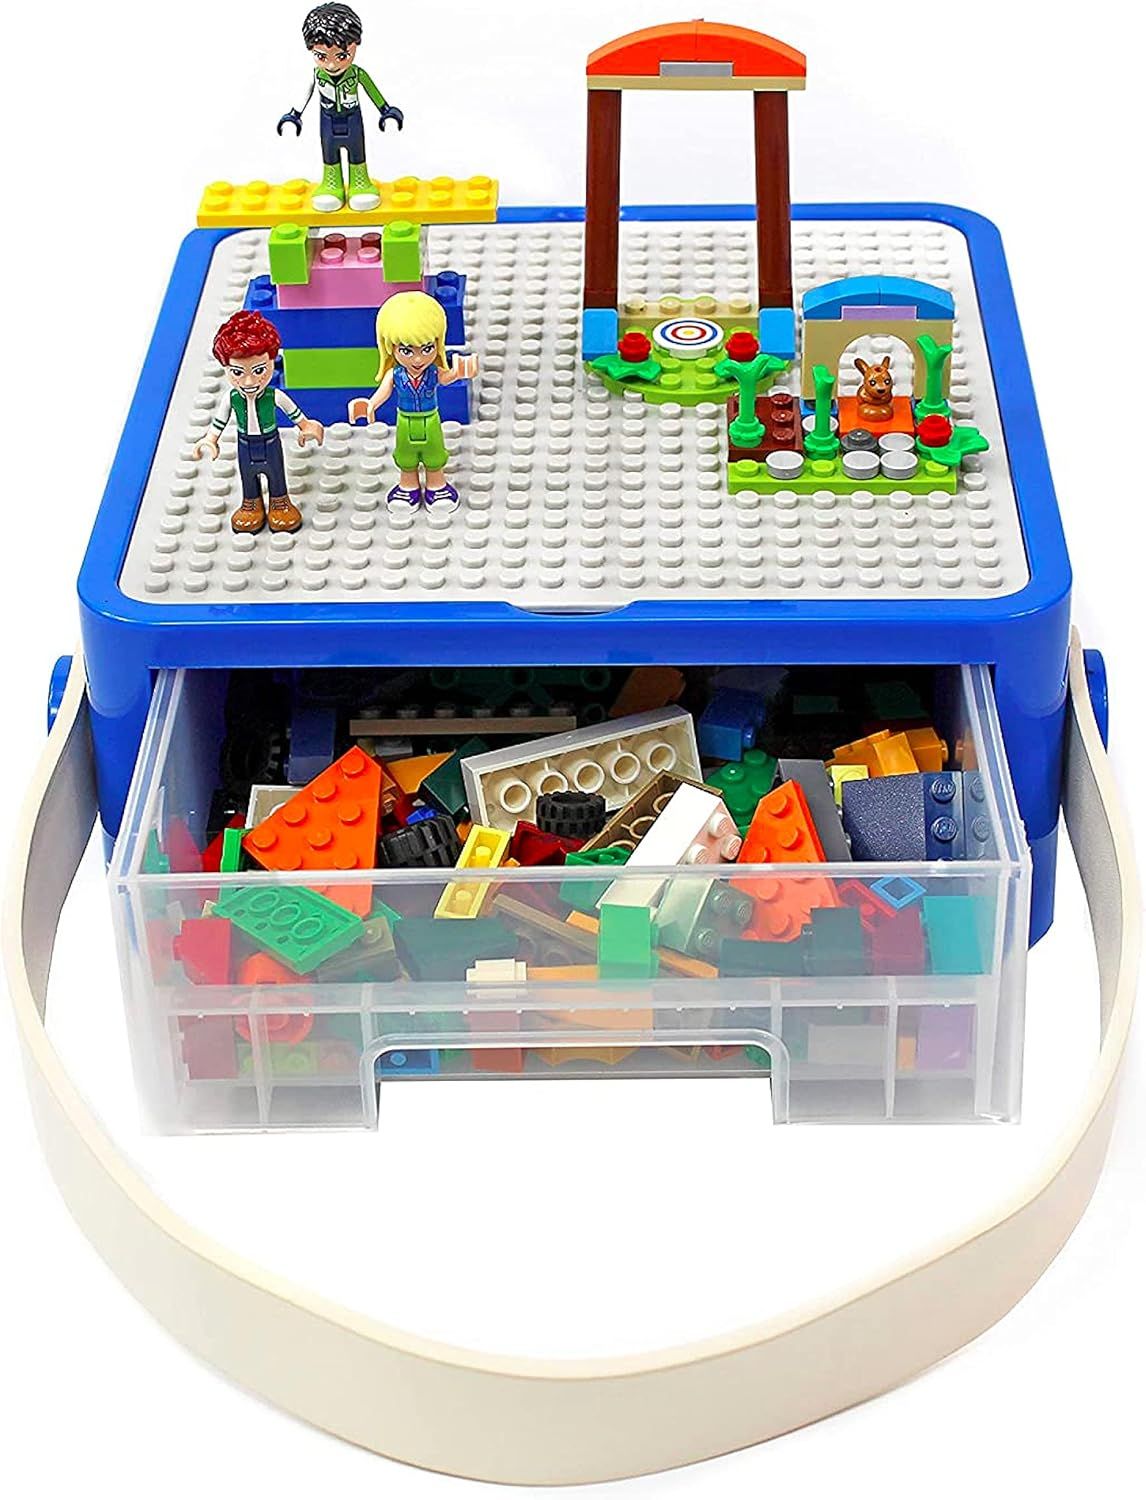 Bins & Things Lego-Compatible Storage Container with Lego Compatible Building Baseplate Lid (8 x ... | Amazon (US)